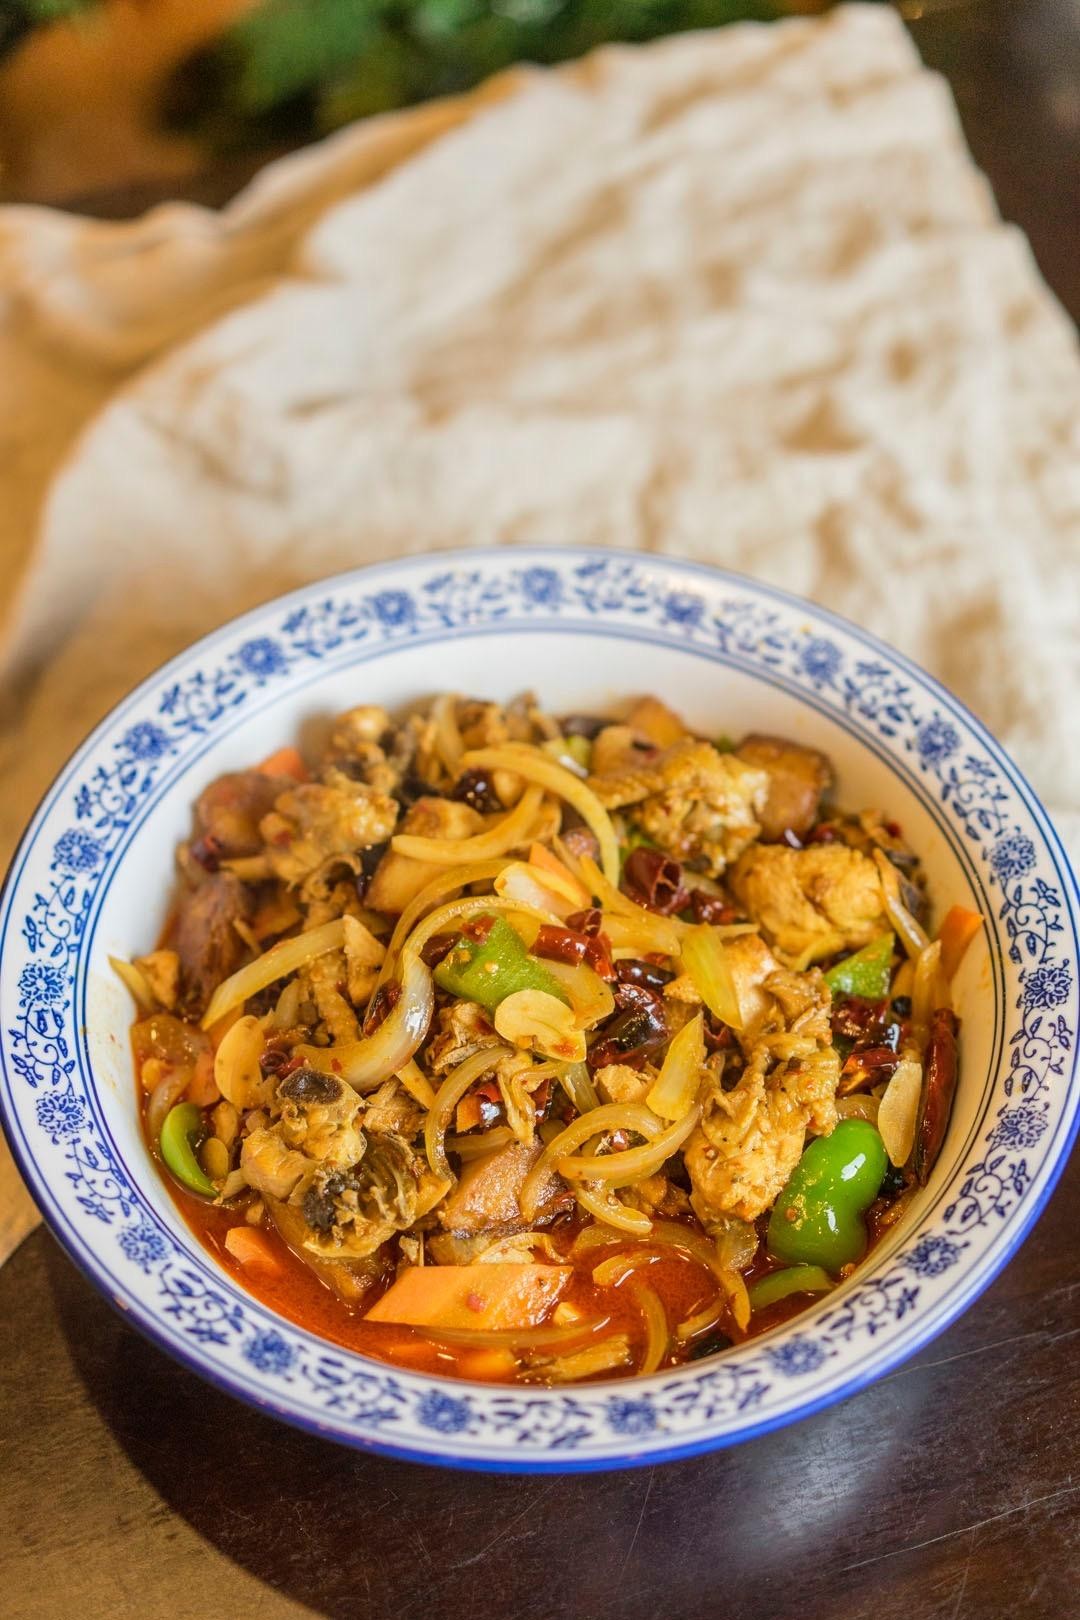 053. Xinjiang Style Chicken over Flat Noodle 新疆大盘鸡